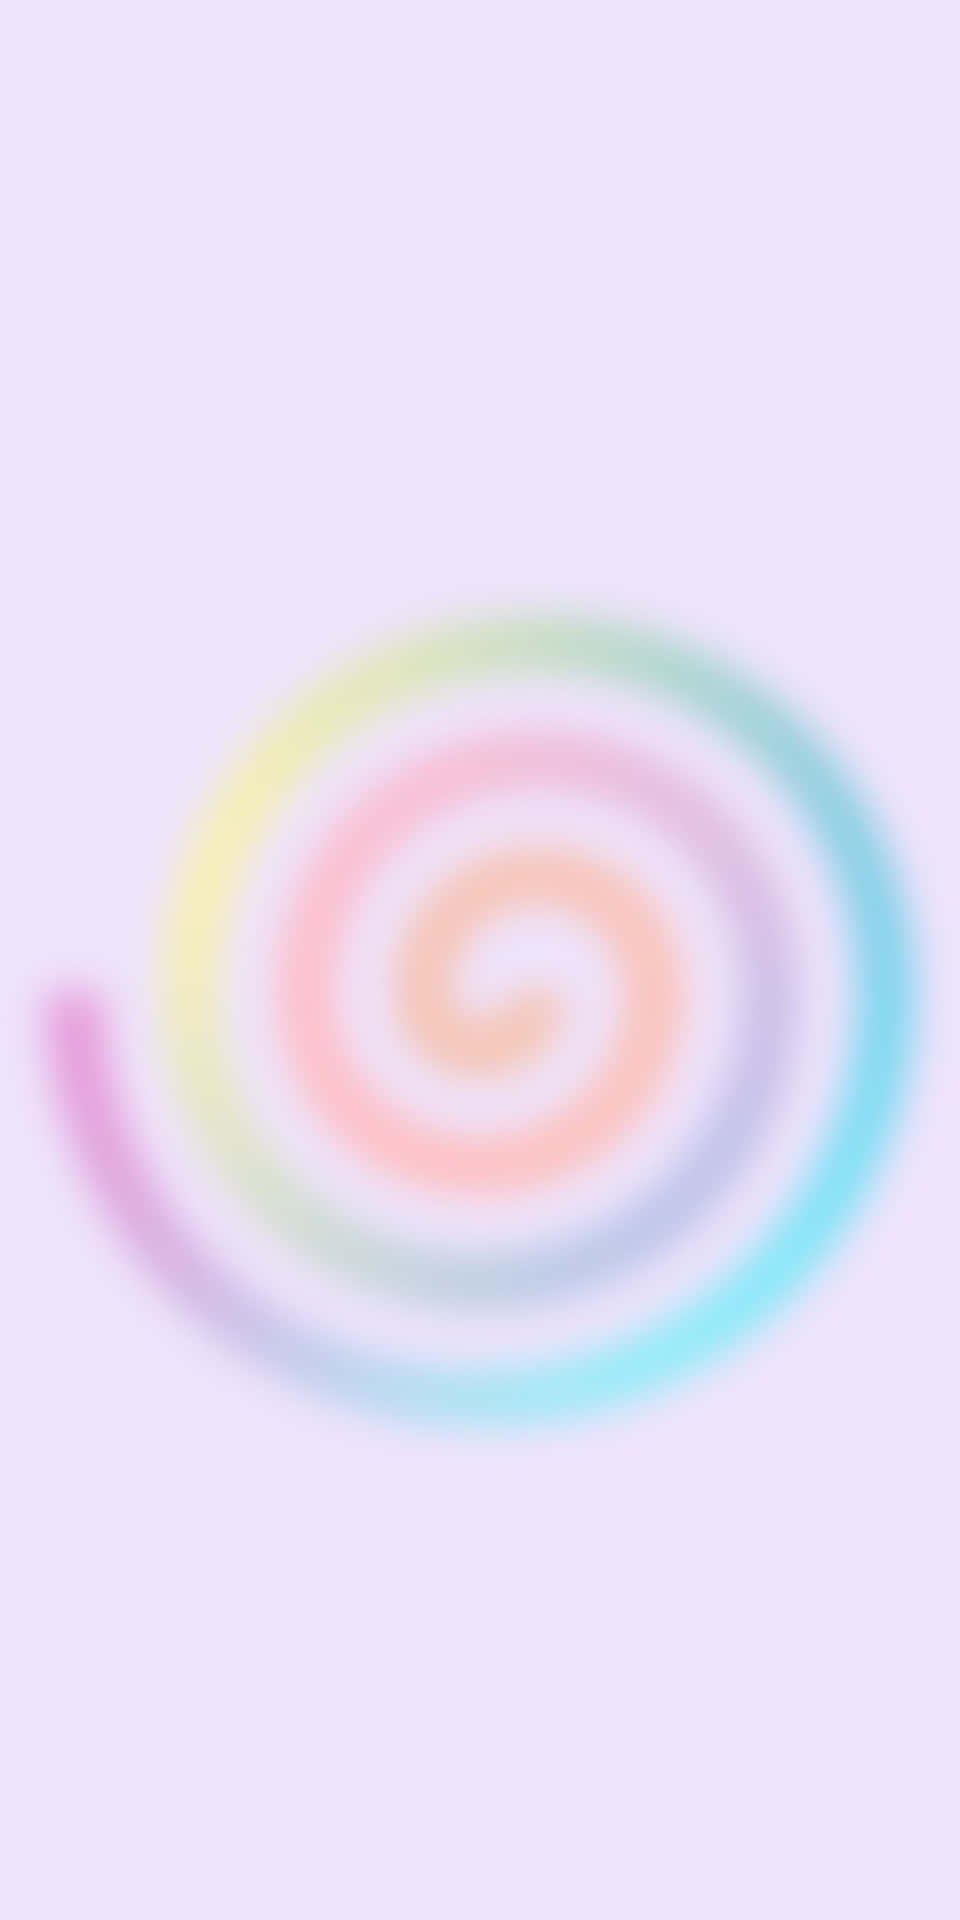 Colorful Spiral Aura Background For Android And Mobile Phones